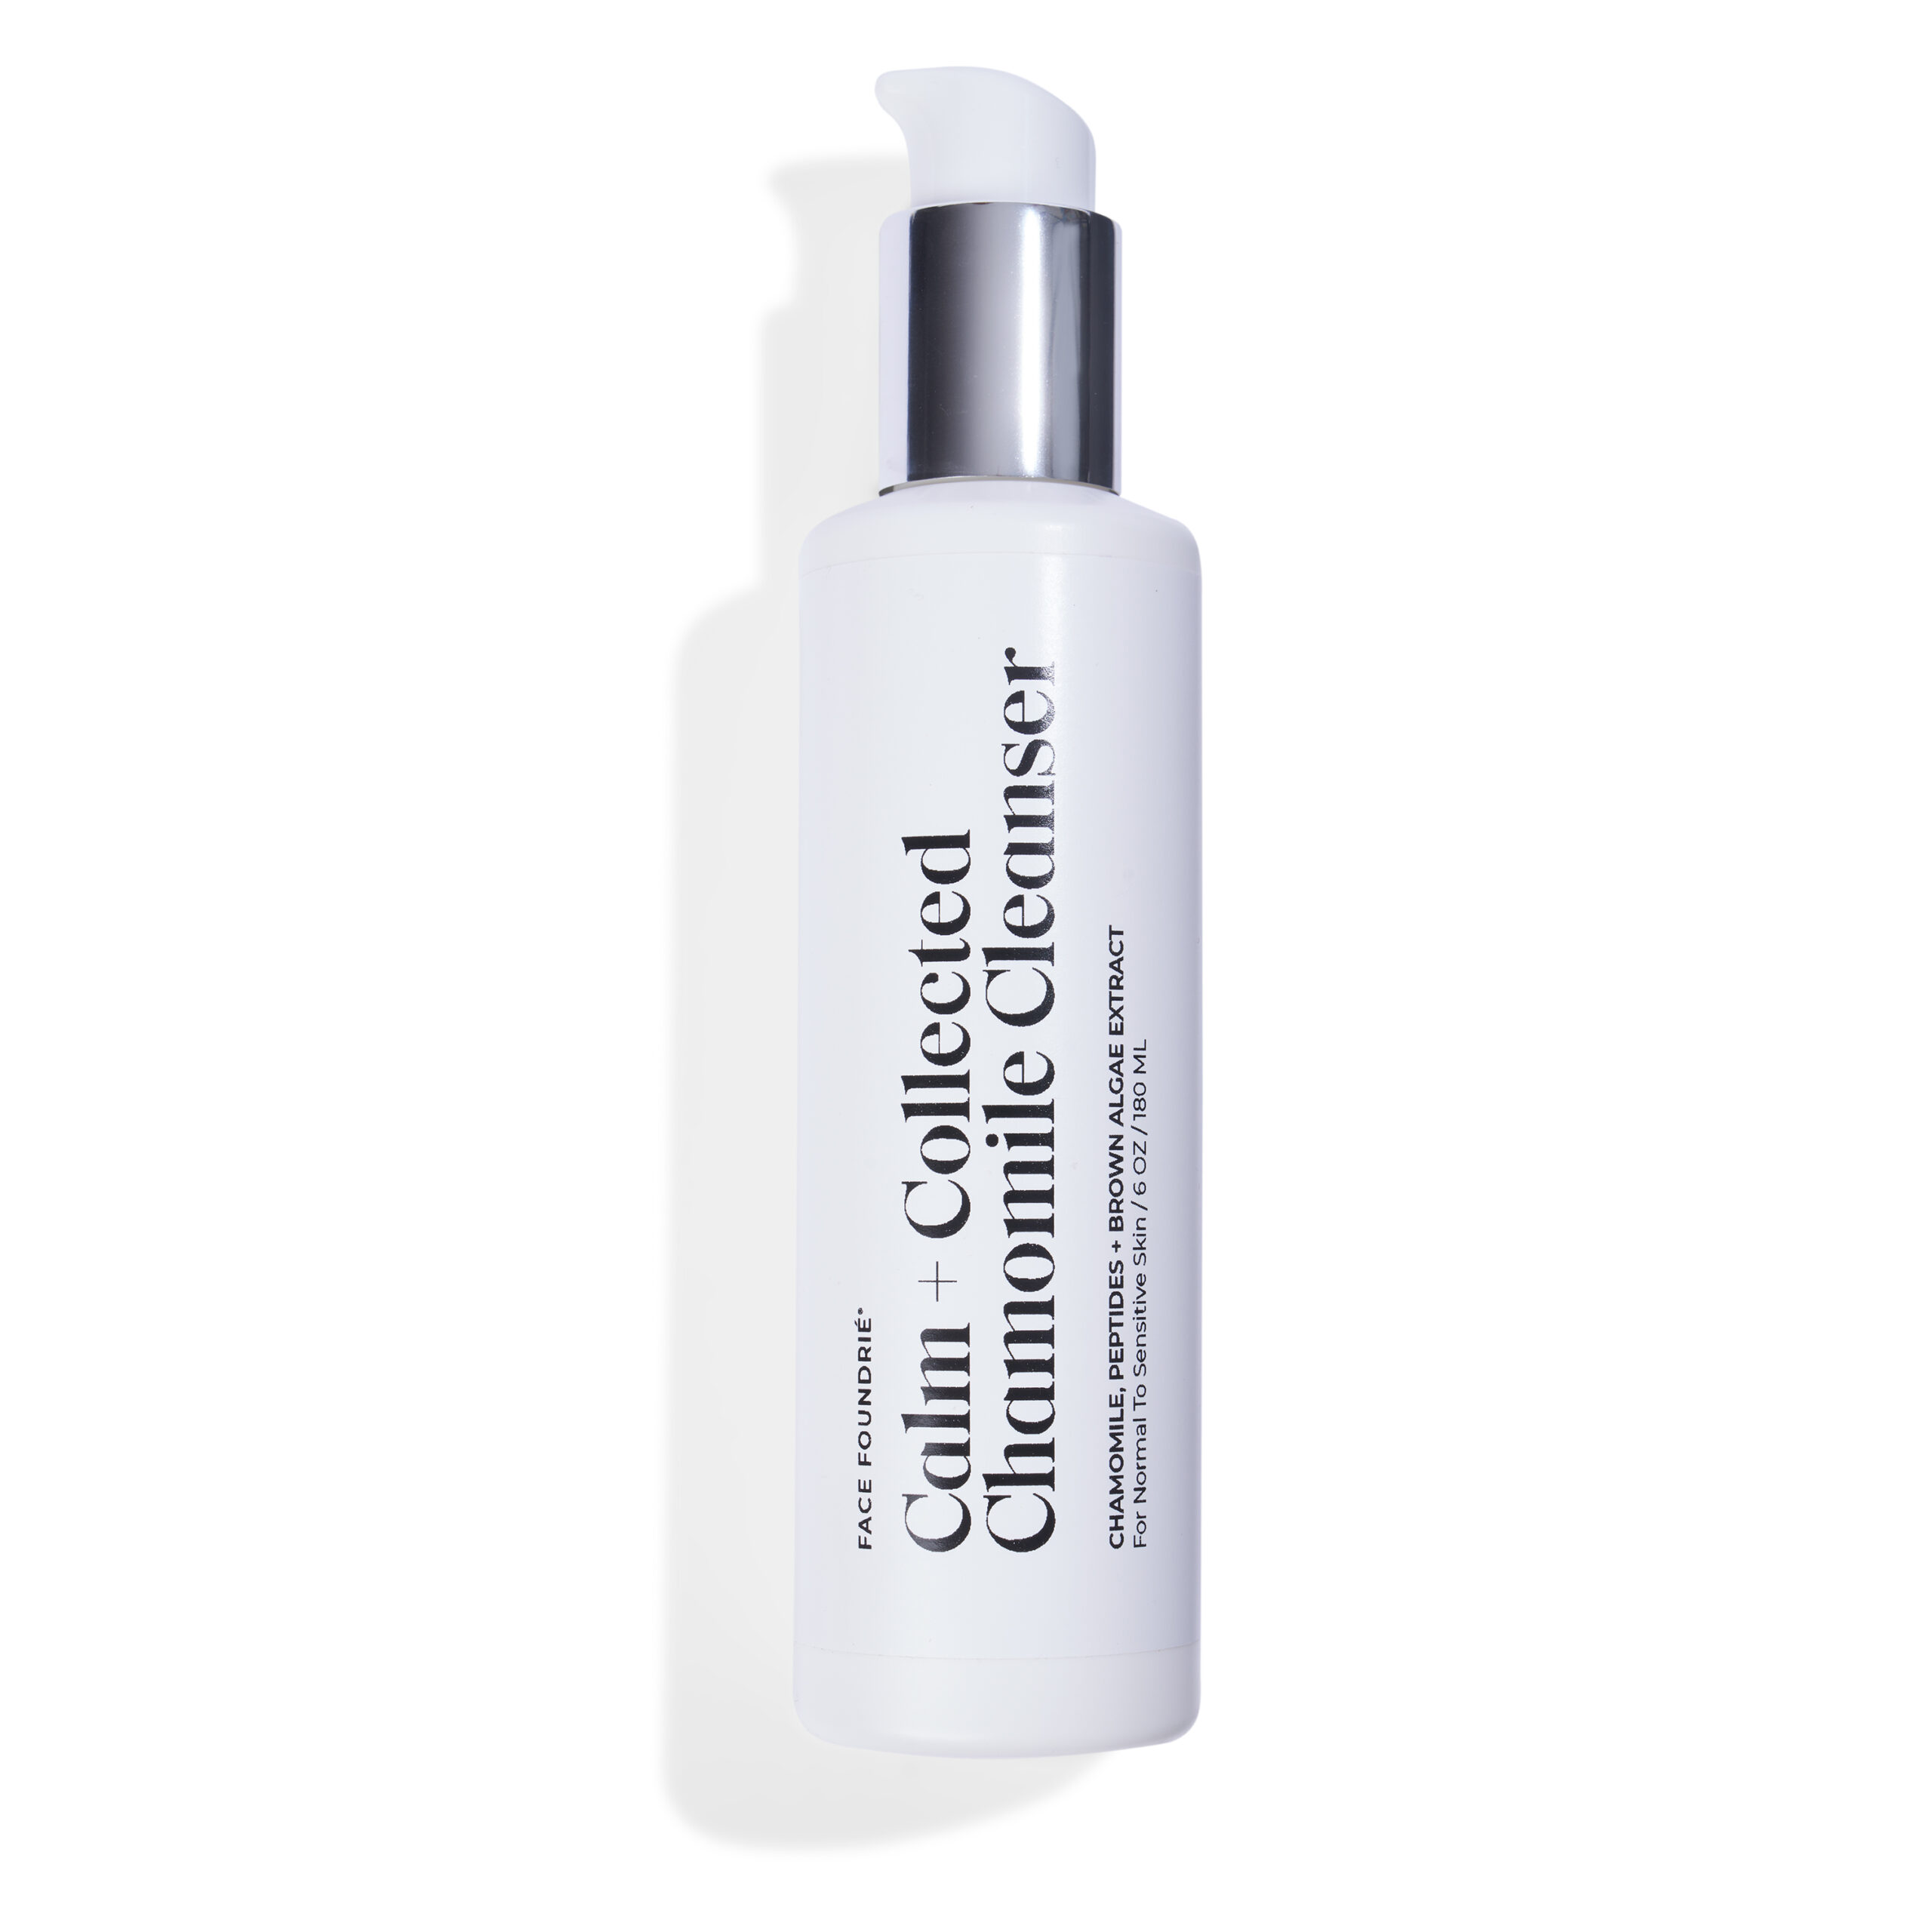 Calm + Collected Chamomile Cleanser